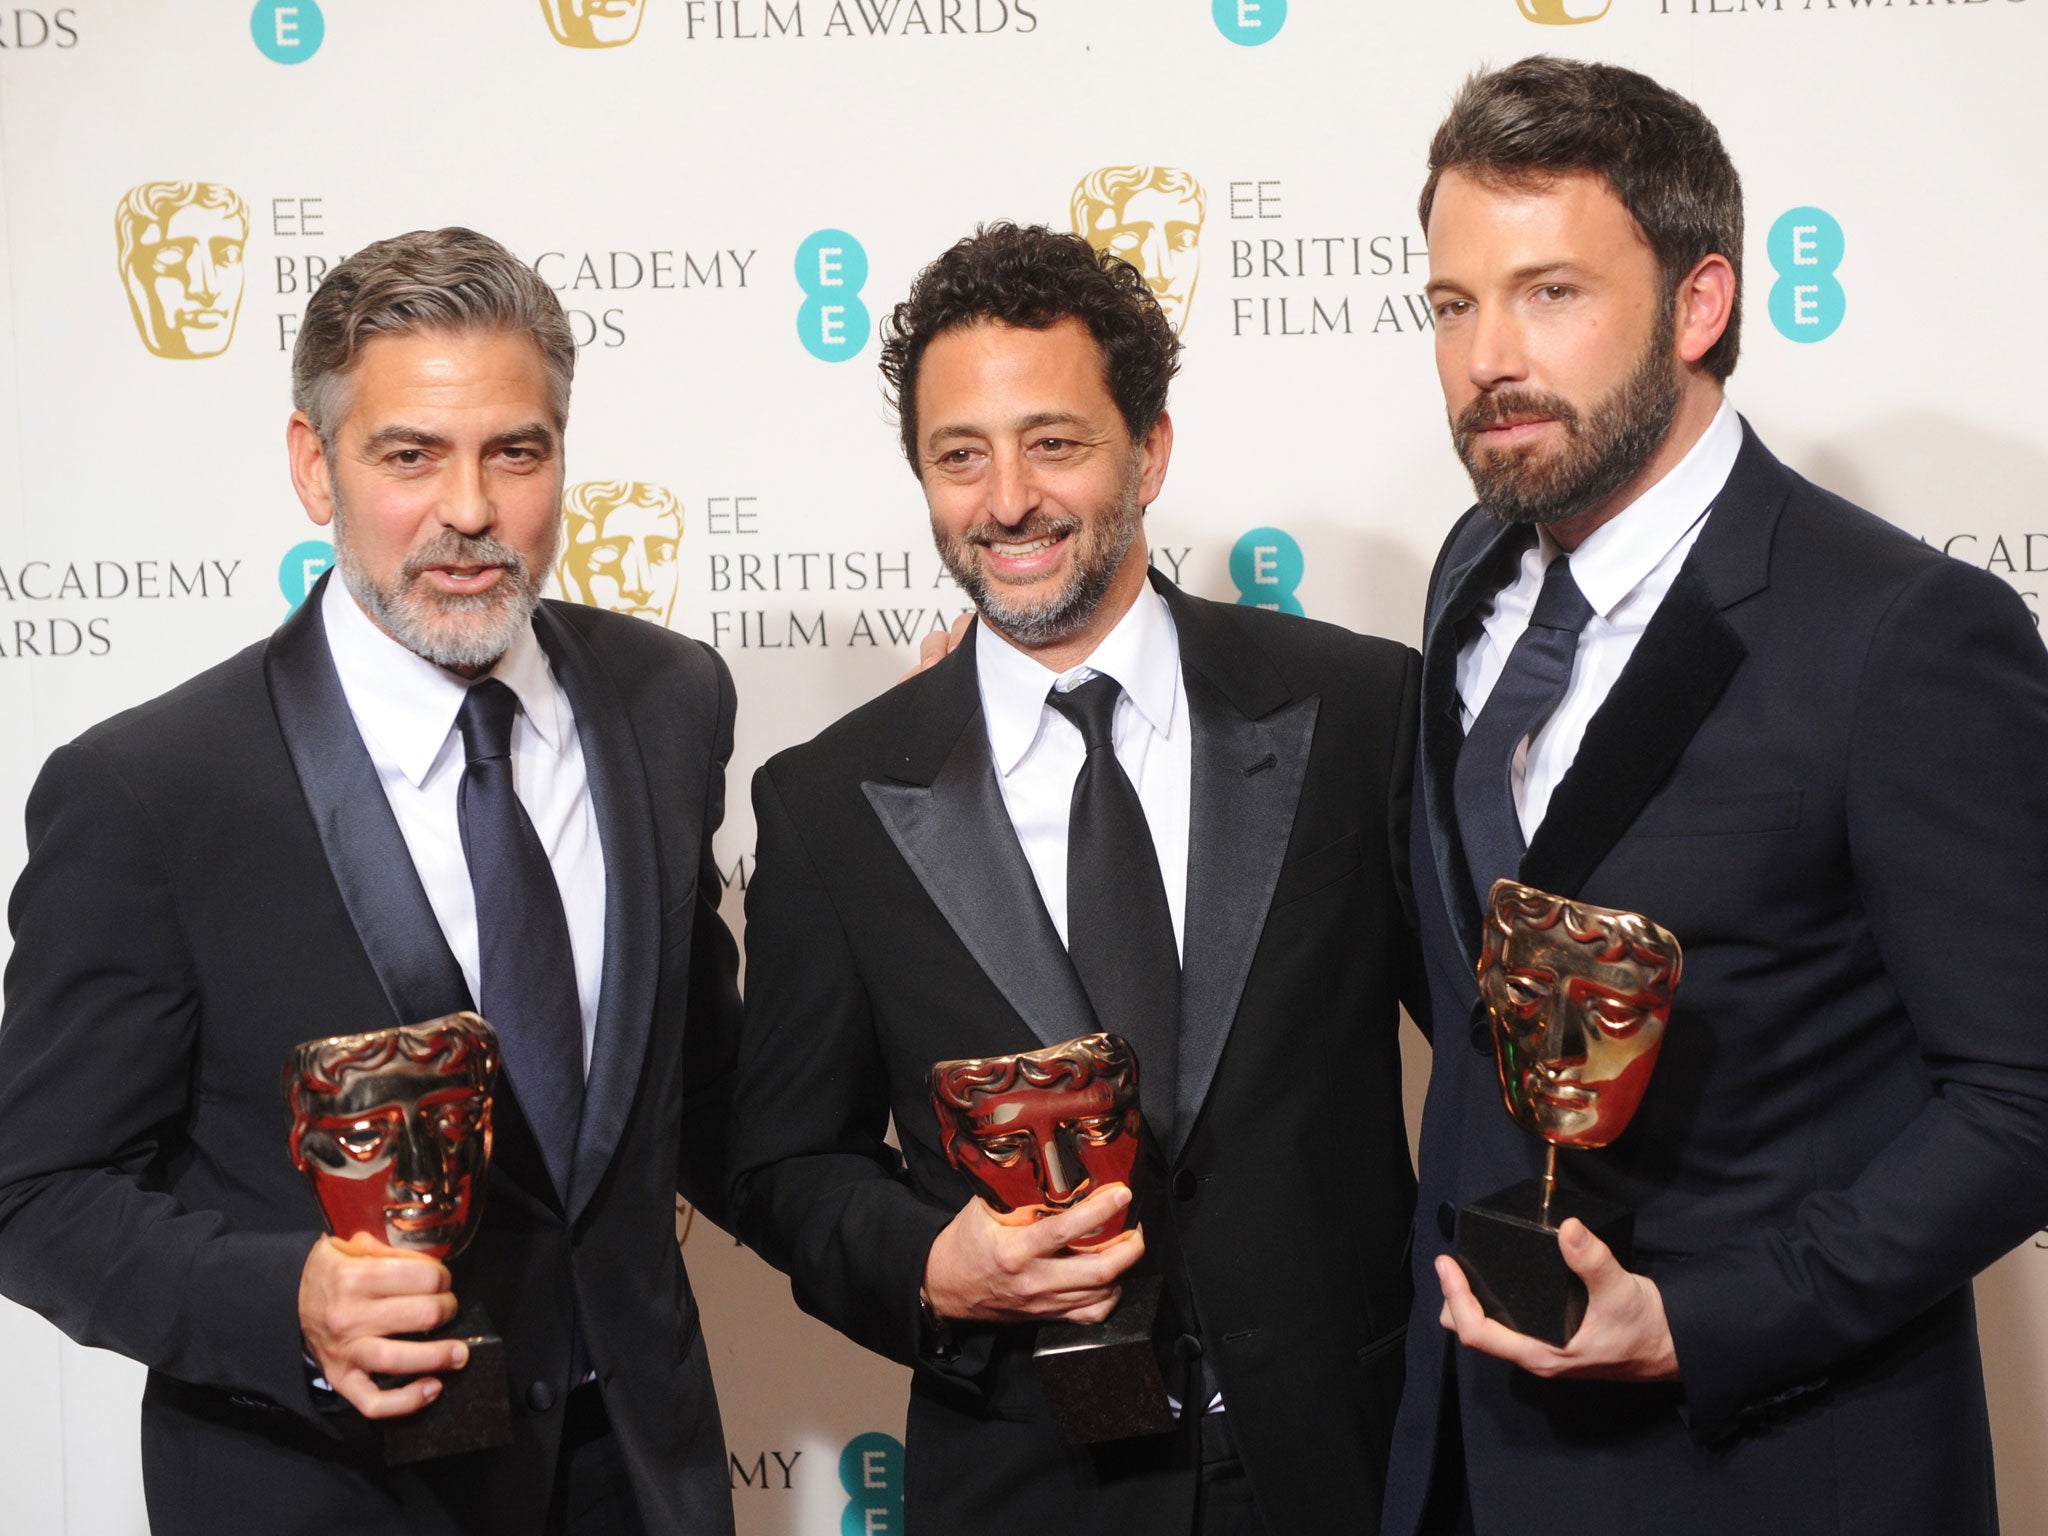 George Clooney, Grant Heslov and Ben Affleck, winners of the Best Film award for 'Argo', pose in the press room at the EE British Academy Film Awards at The Royal Opera House on February 10, 2013 in London, England.